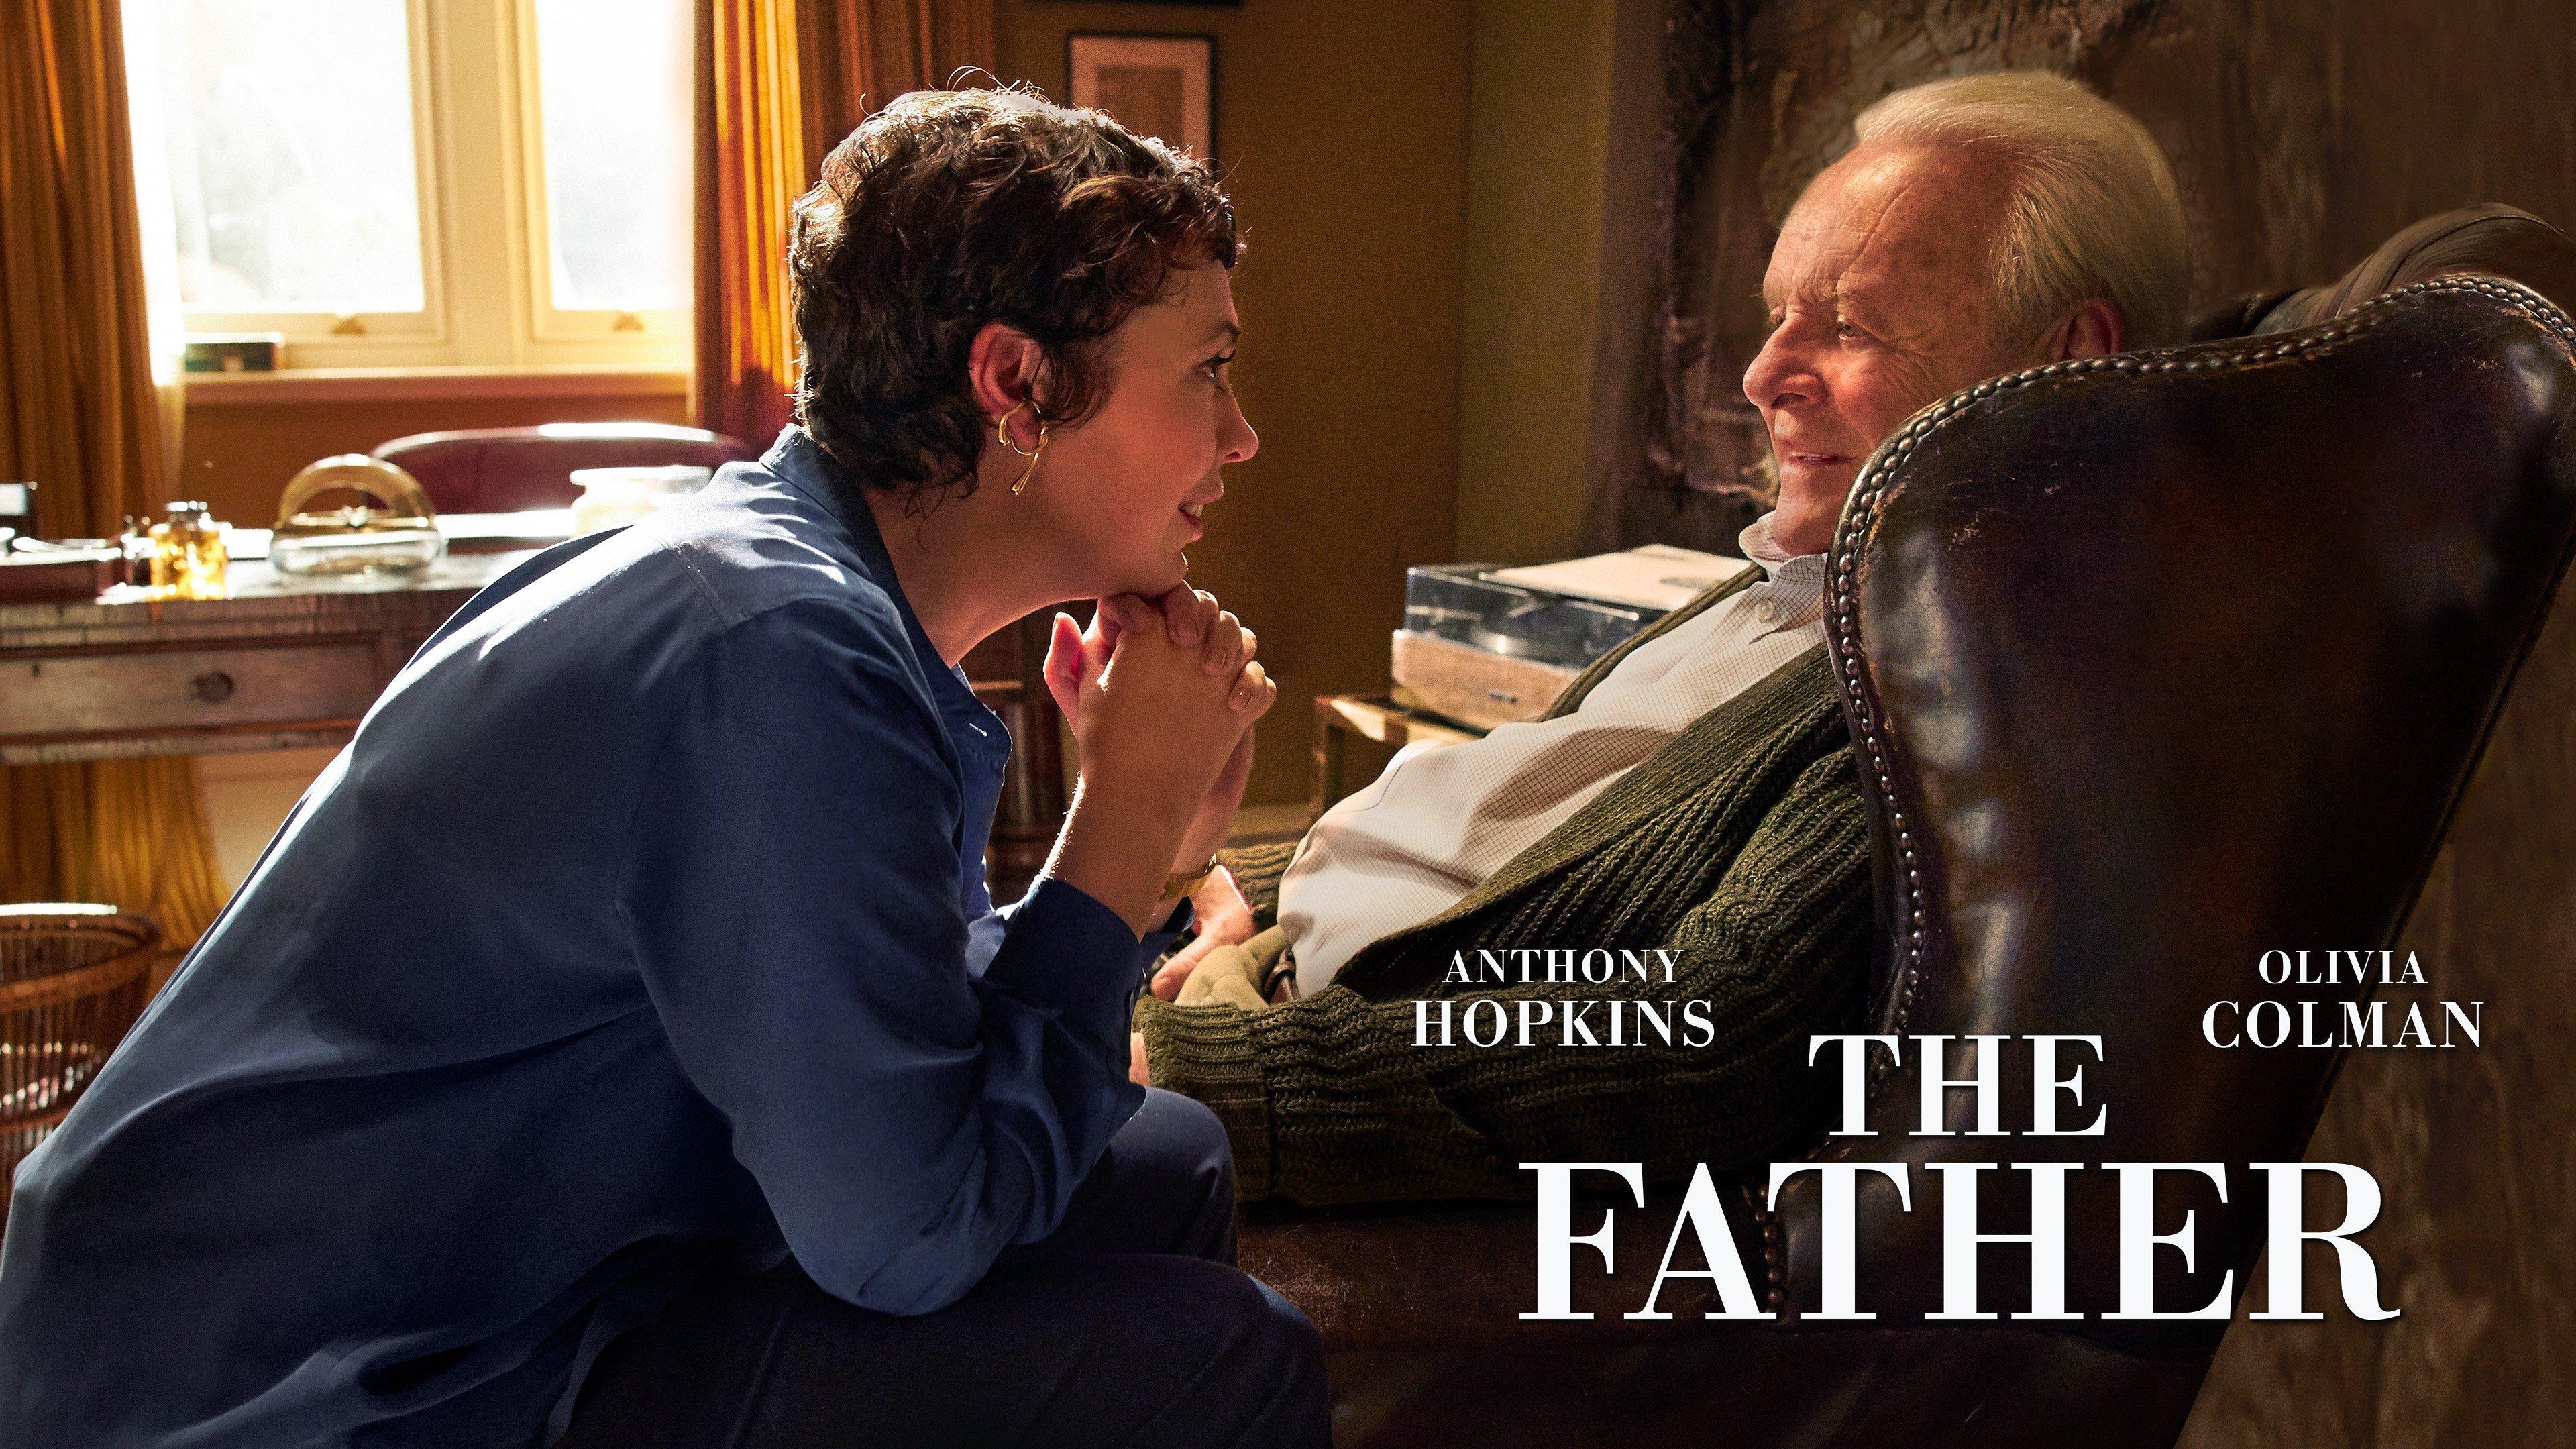 Watch The Father Streaming Online on Philo (Free Trial)